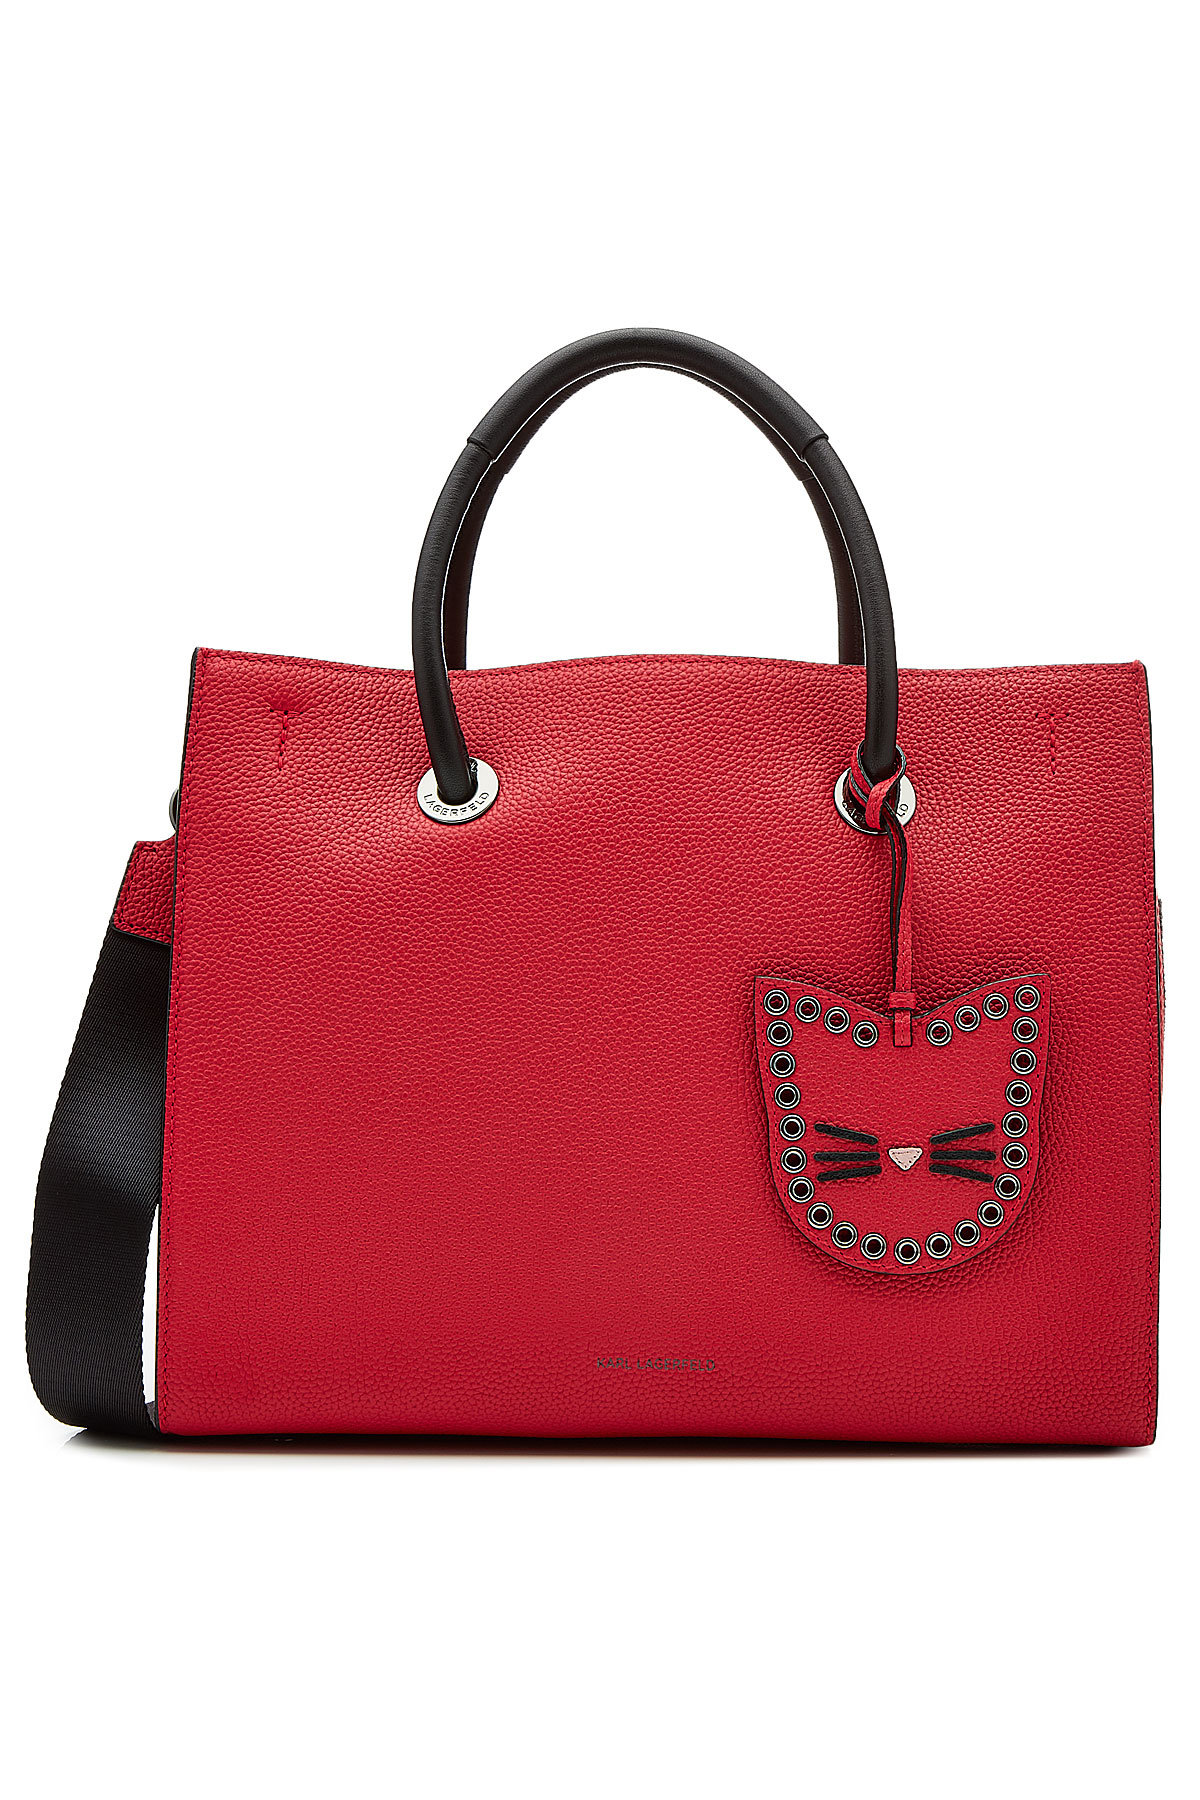 Karl Lagerfeld - K/Karry All Leather Tote